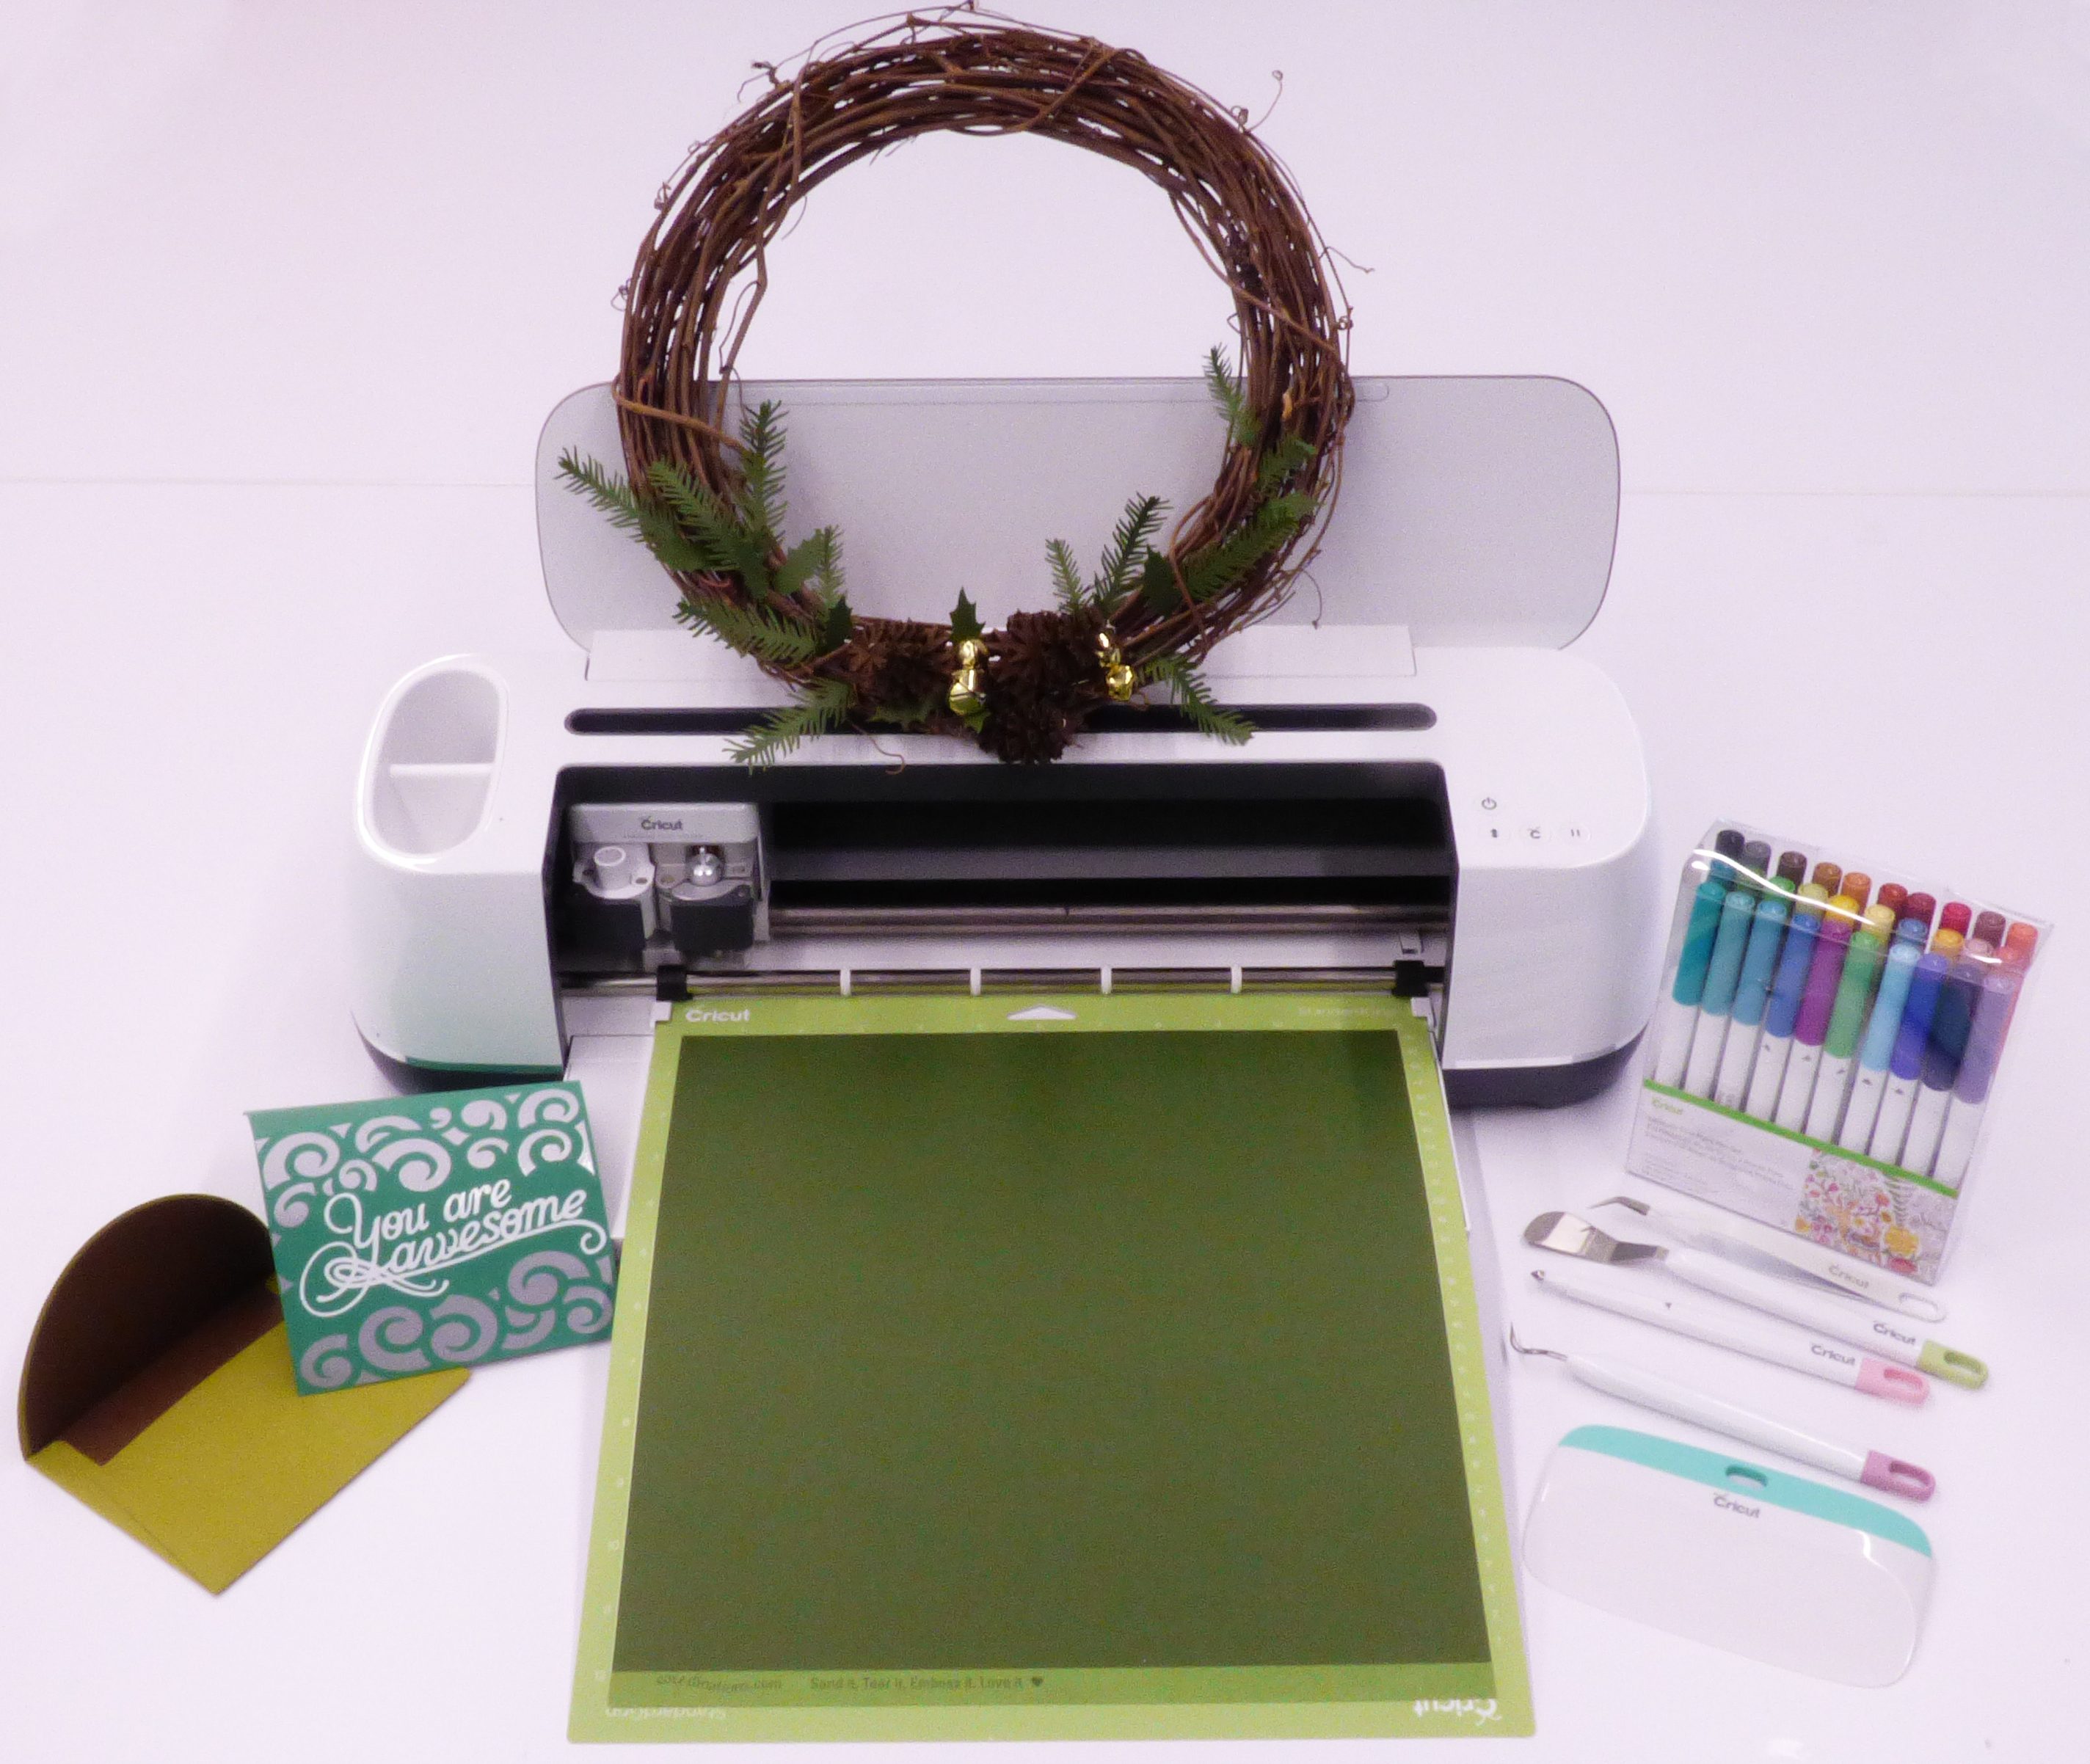 The folks over at Cricut call their new Cricut Maker the “ultimate smart cu...